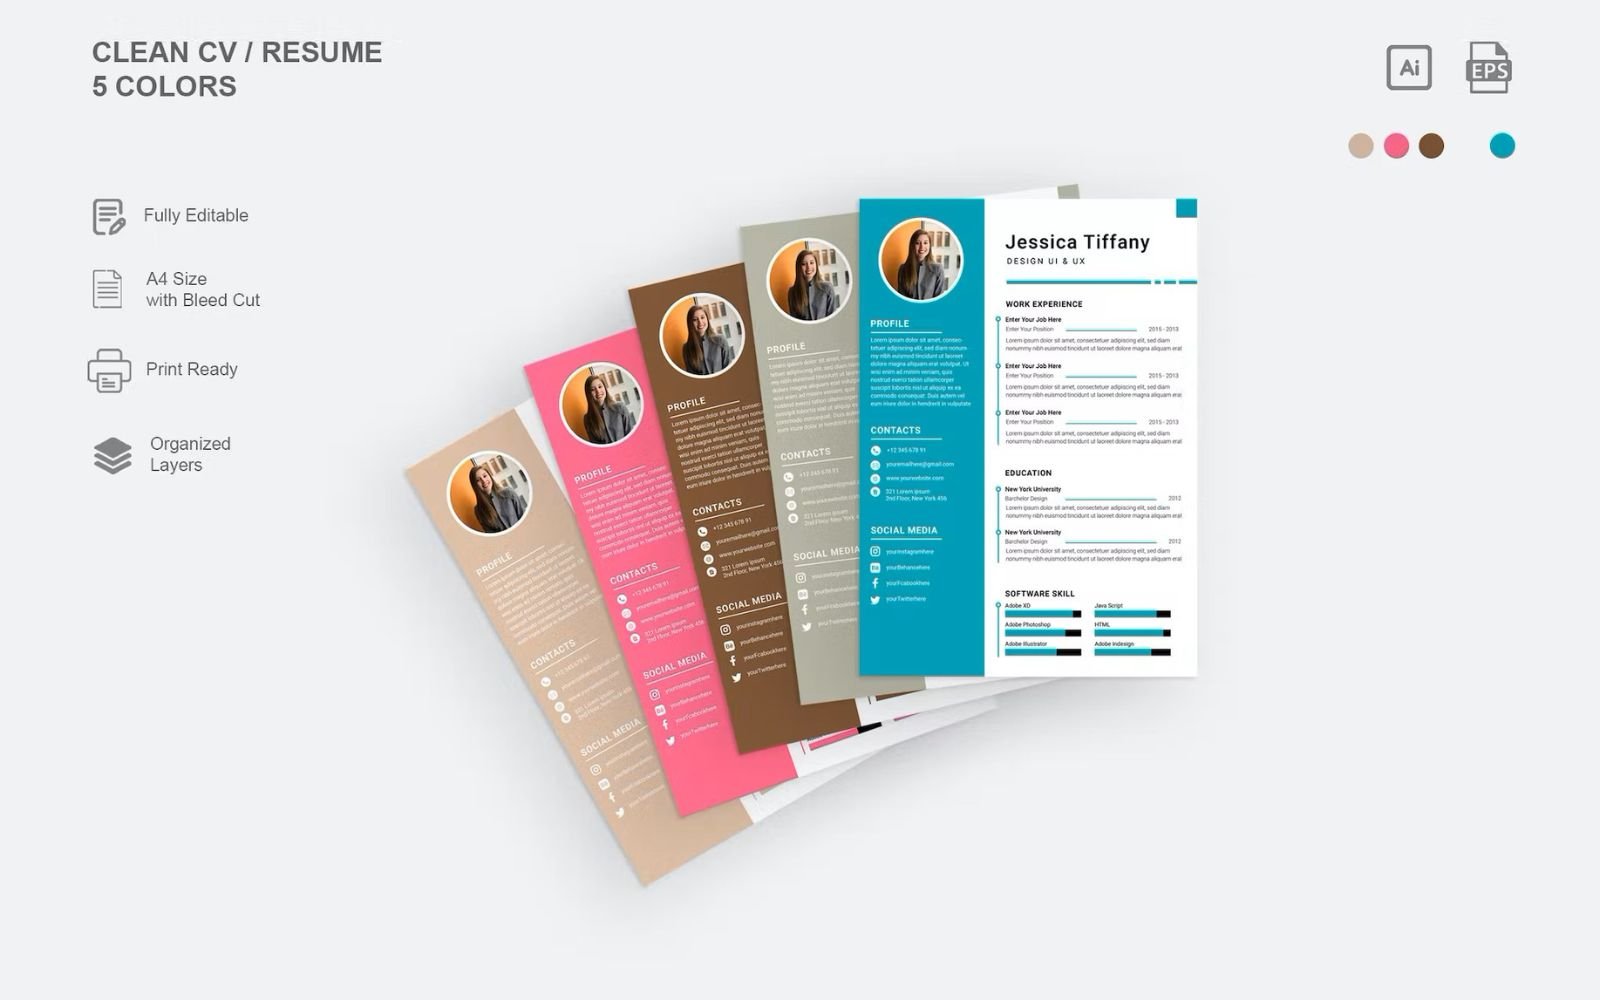 Resume Template with 5 different Colors